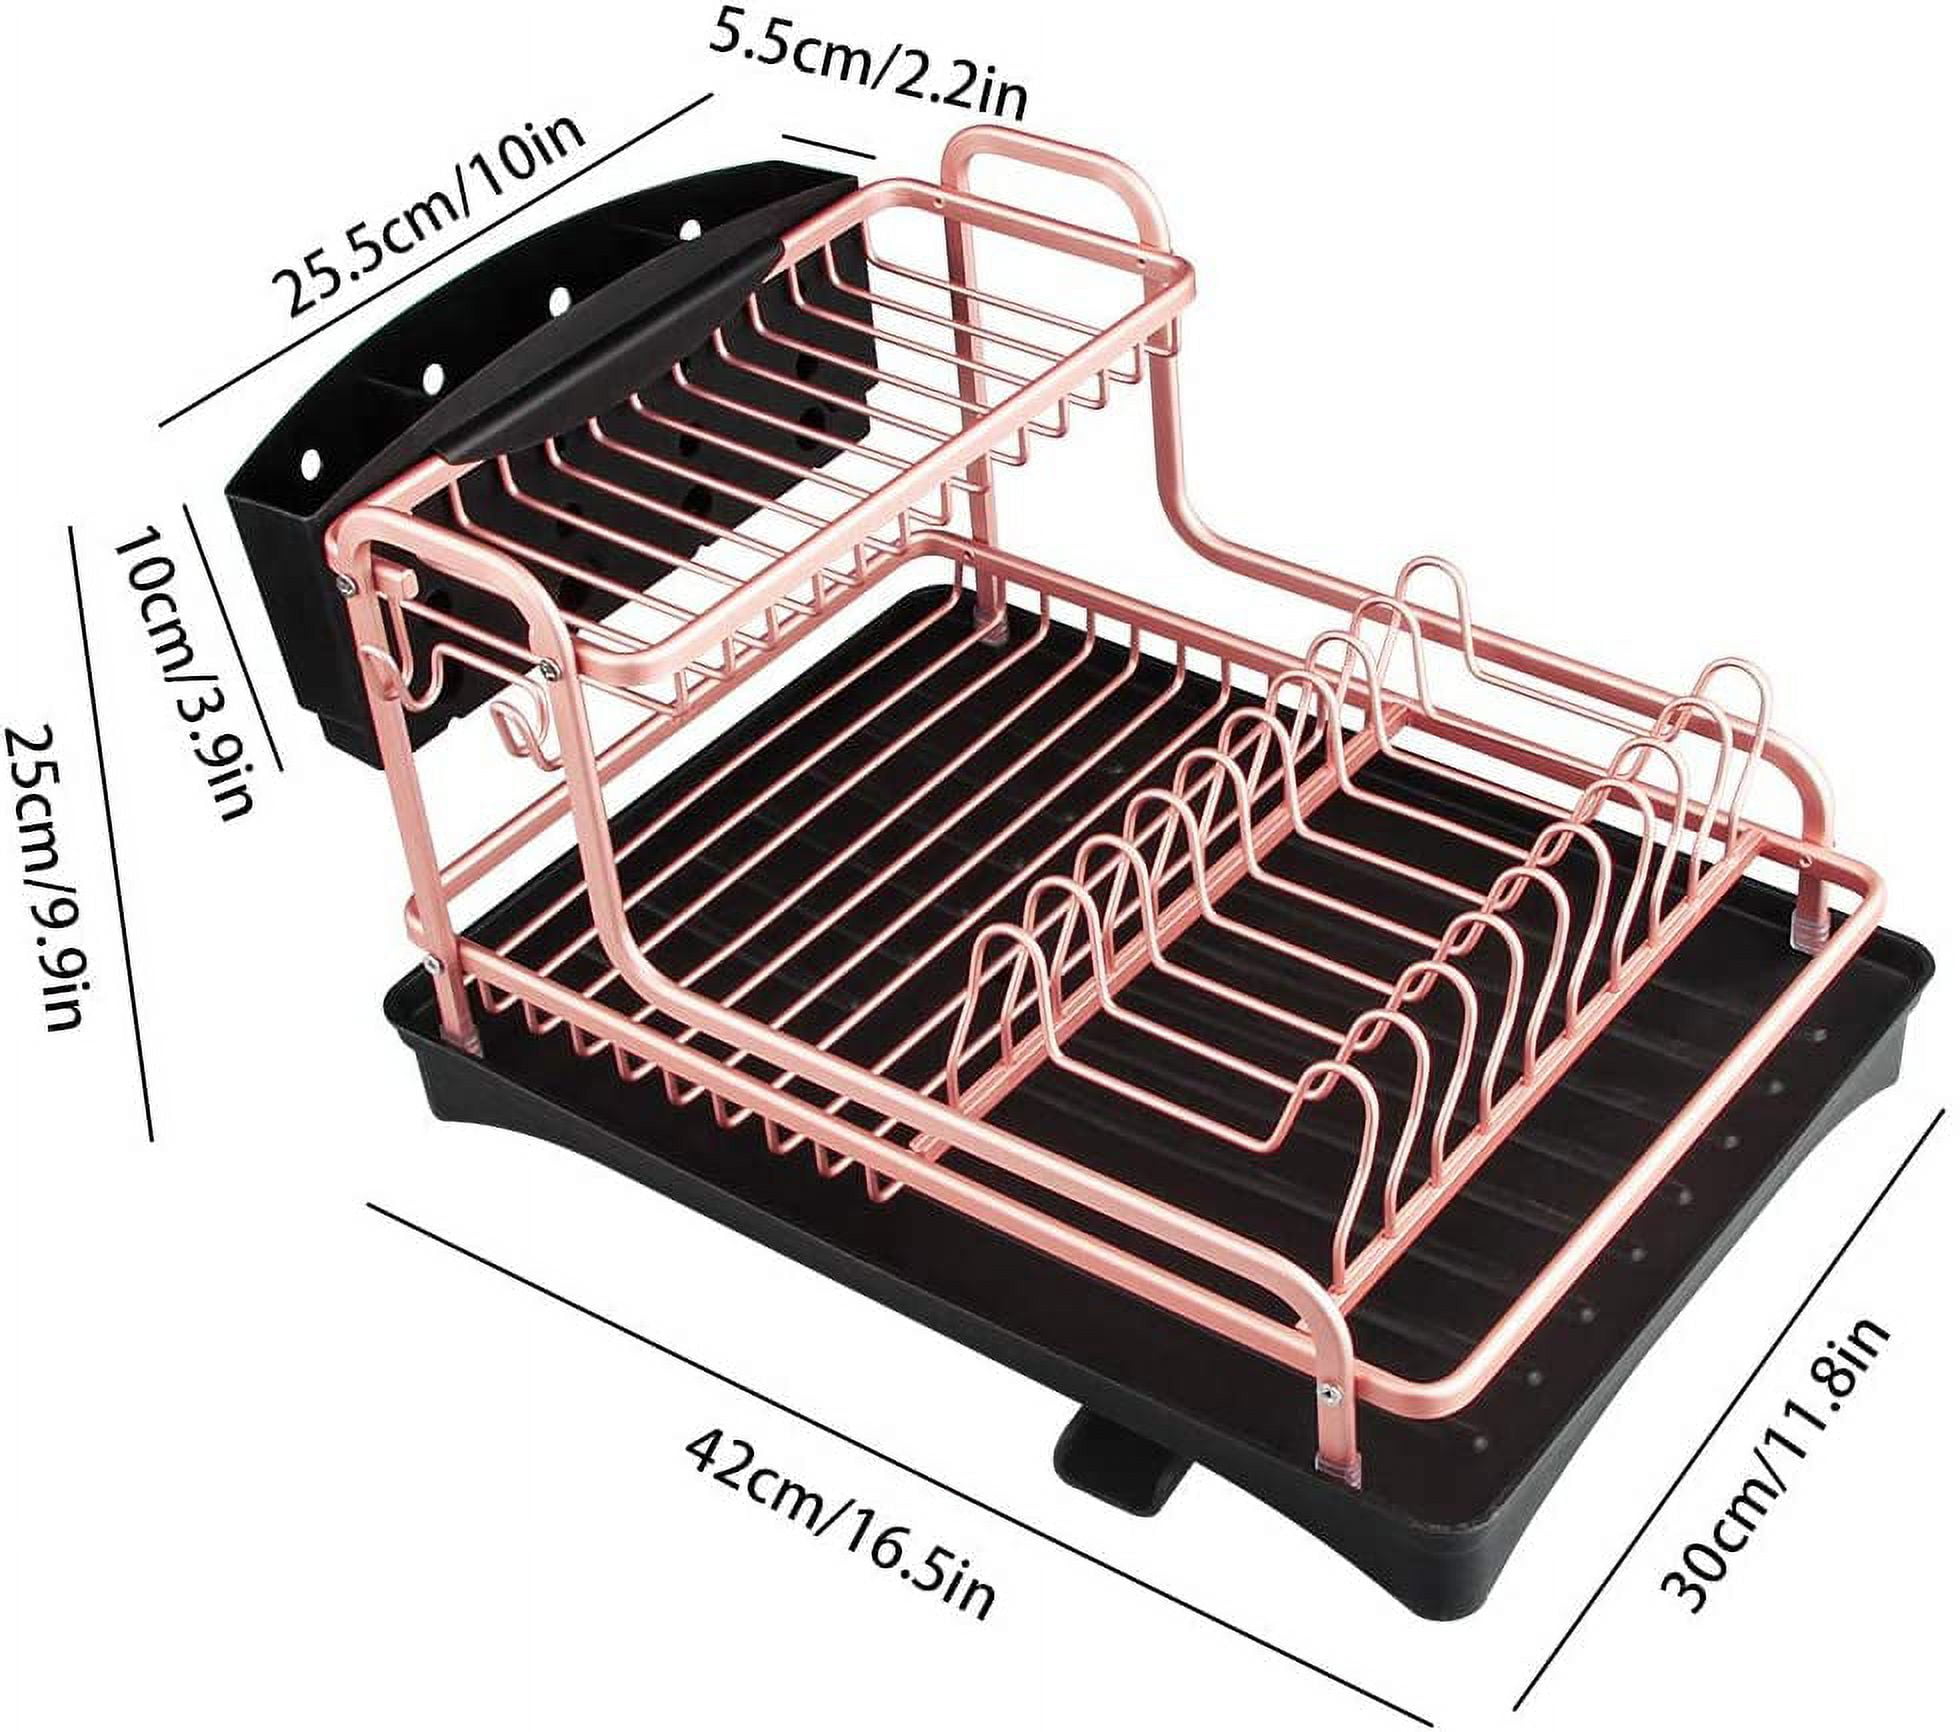 Medium Size Dish Drying Rack and Drain Board with Lid Cover, Tomorotec 16  x 12.2 x 10.6 Nursing Bottle Holder, Kitchen Plate Cup Dish Drying Rack  Tray Cutlery Dish Drainer 